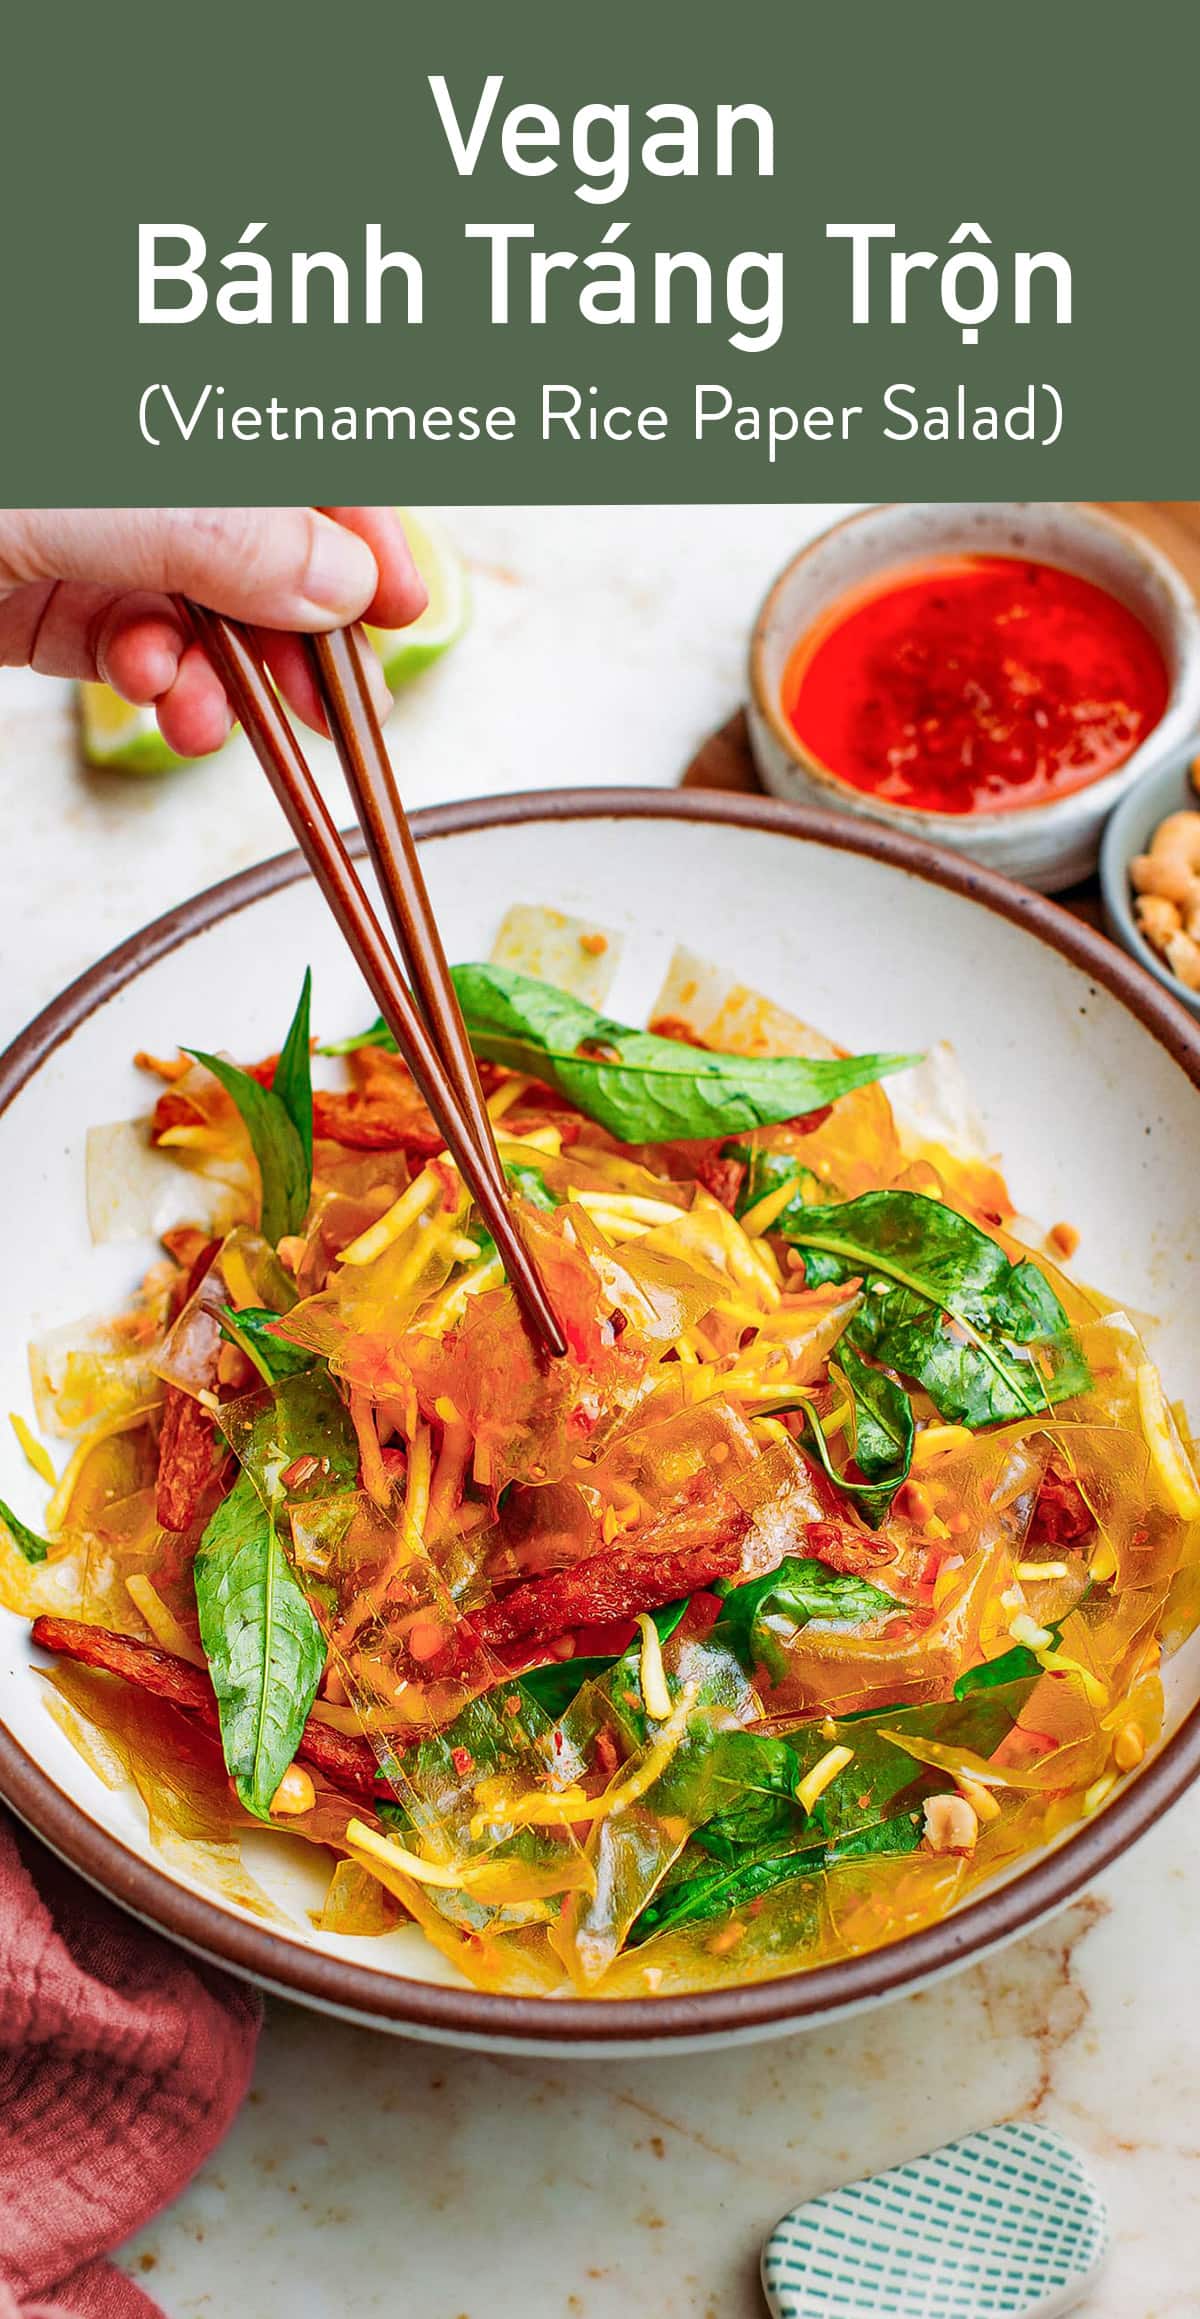 Chewy, spicy, and zesty rice paper salad! Flavored with lemongrass, chili, green onions, and mango! A great way to use leftover rice paper! #plantbased #vegan #vietnamese